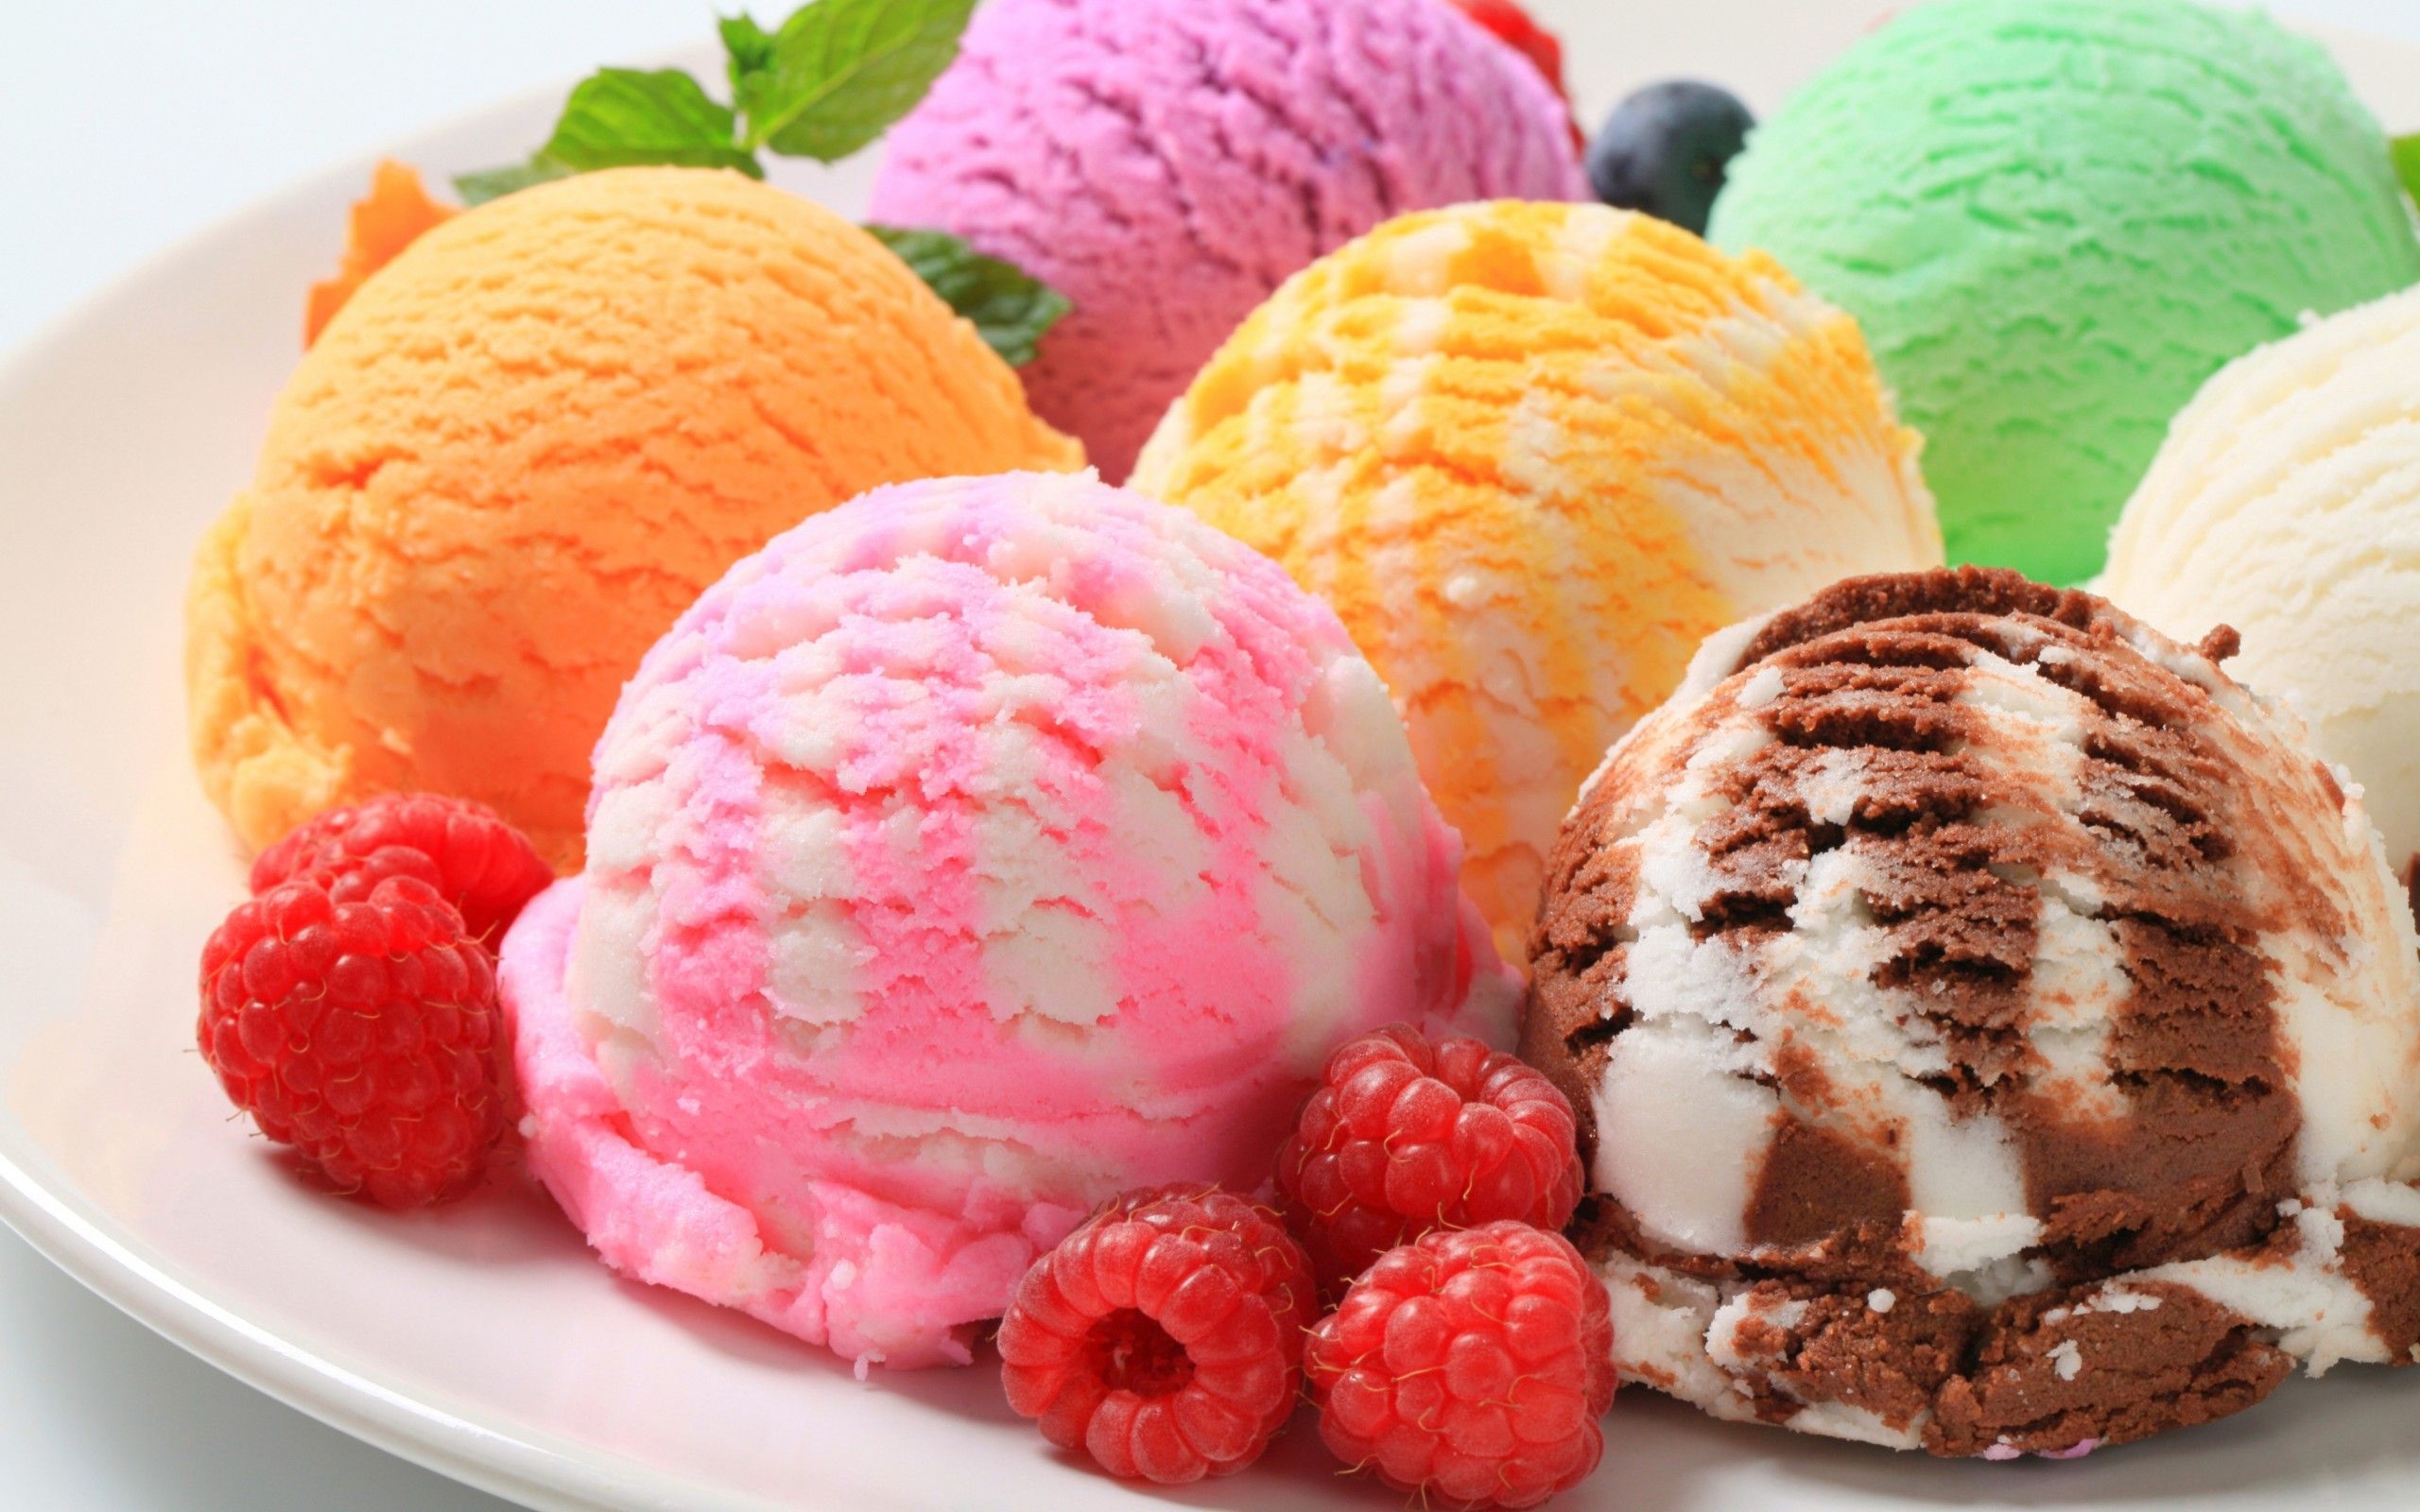 Colorful Ice Cream Wallpaper Free Colorful Ice Cream Background